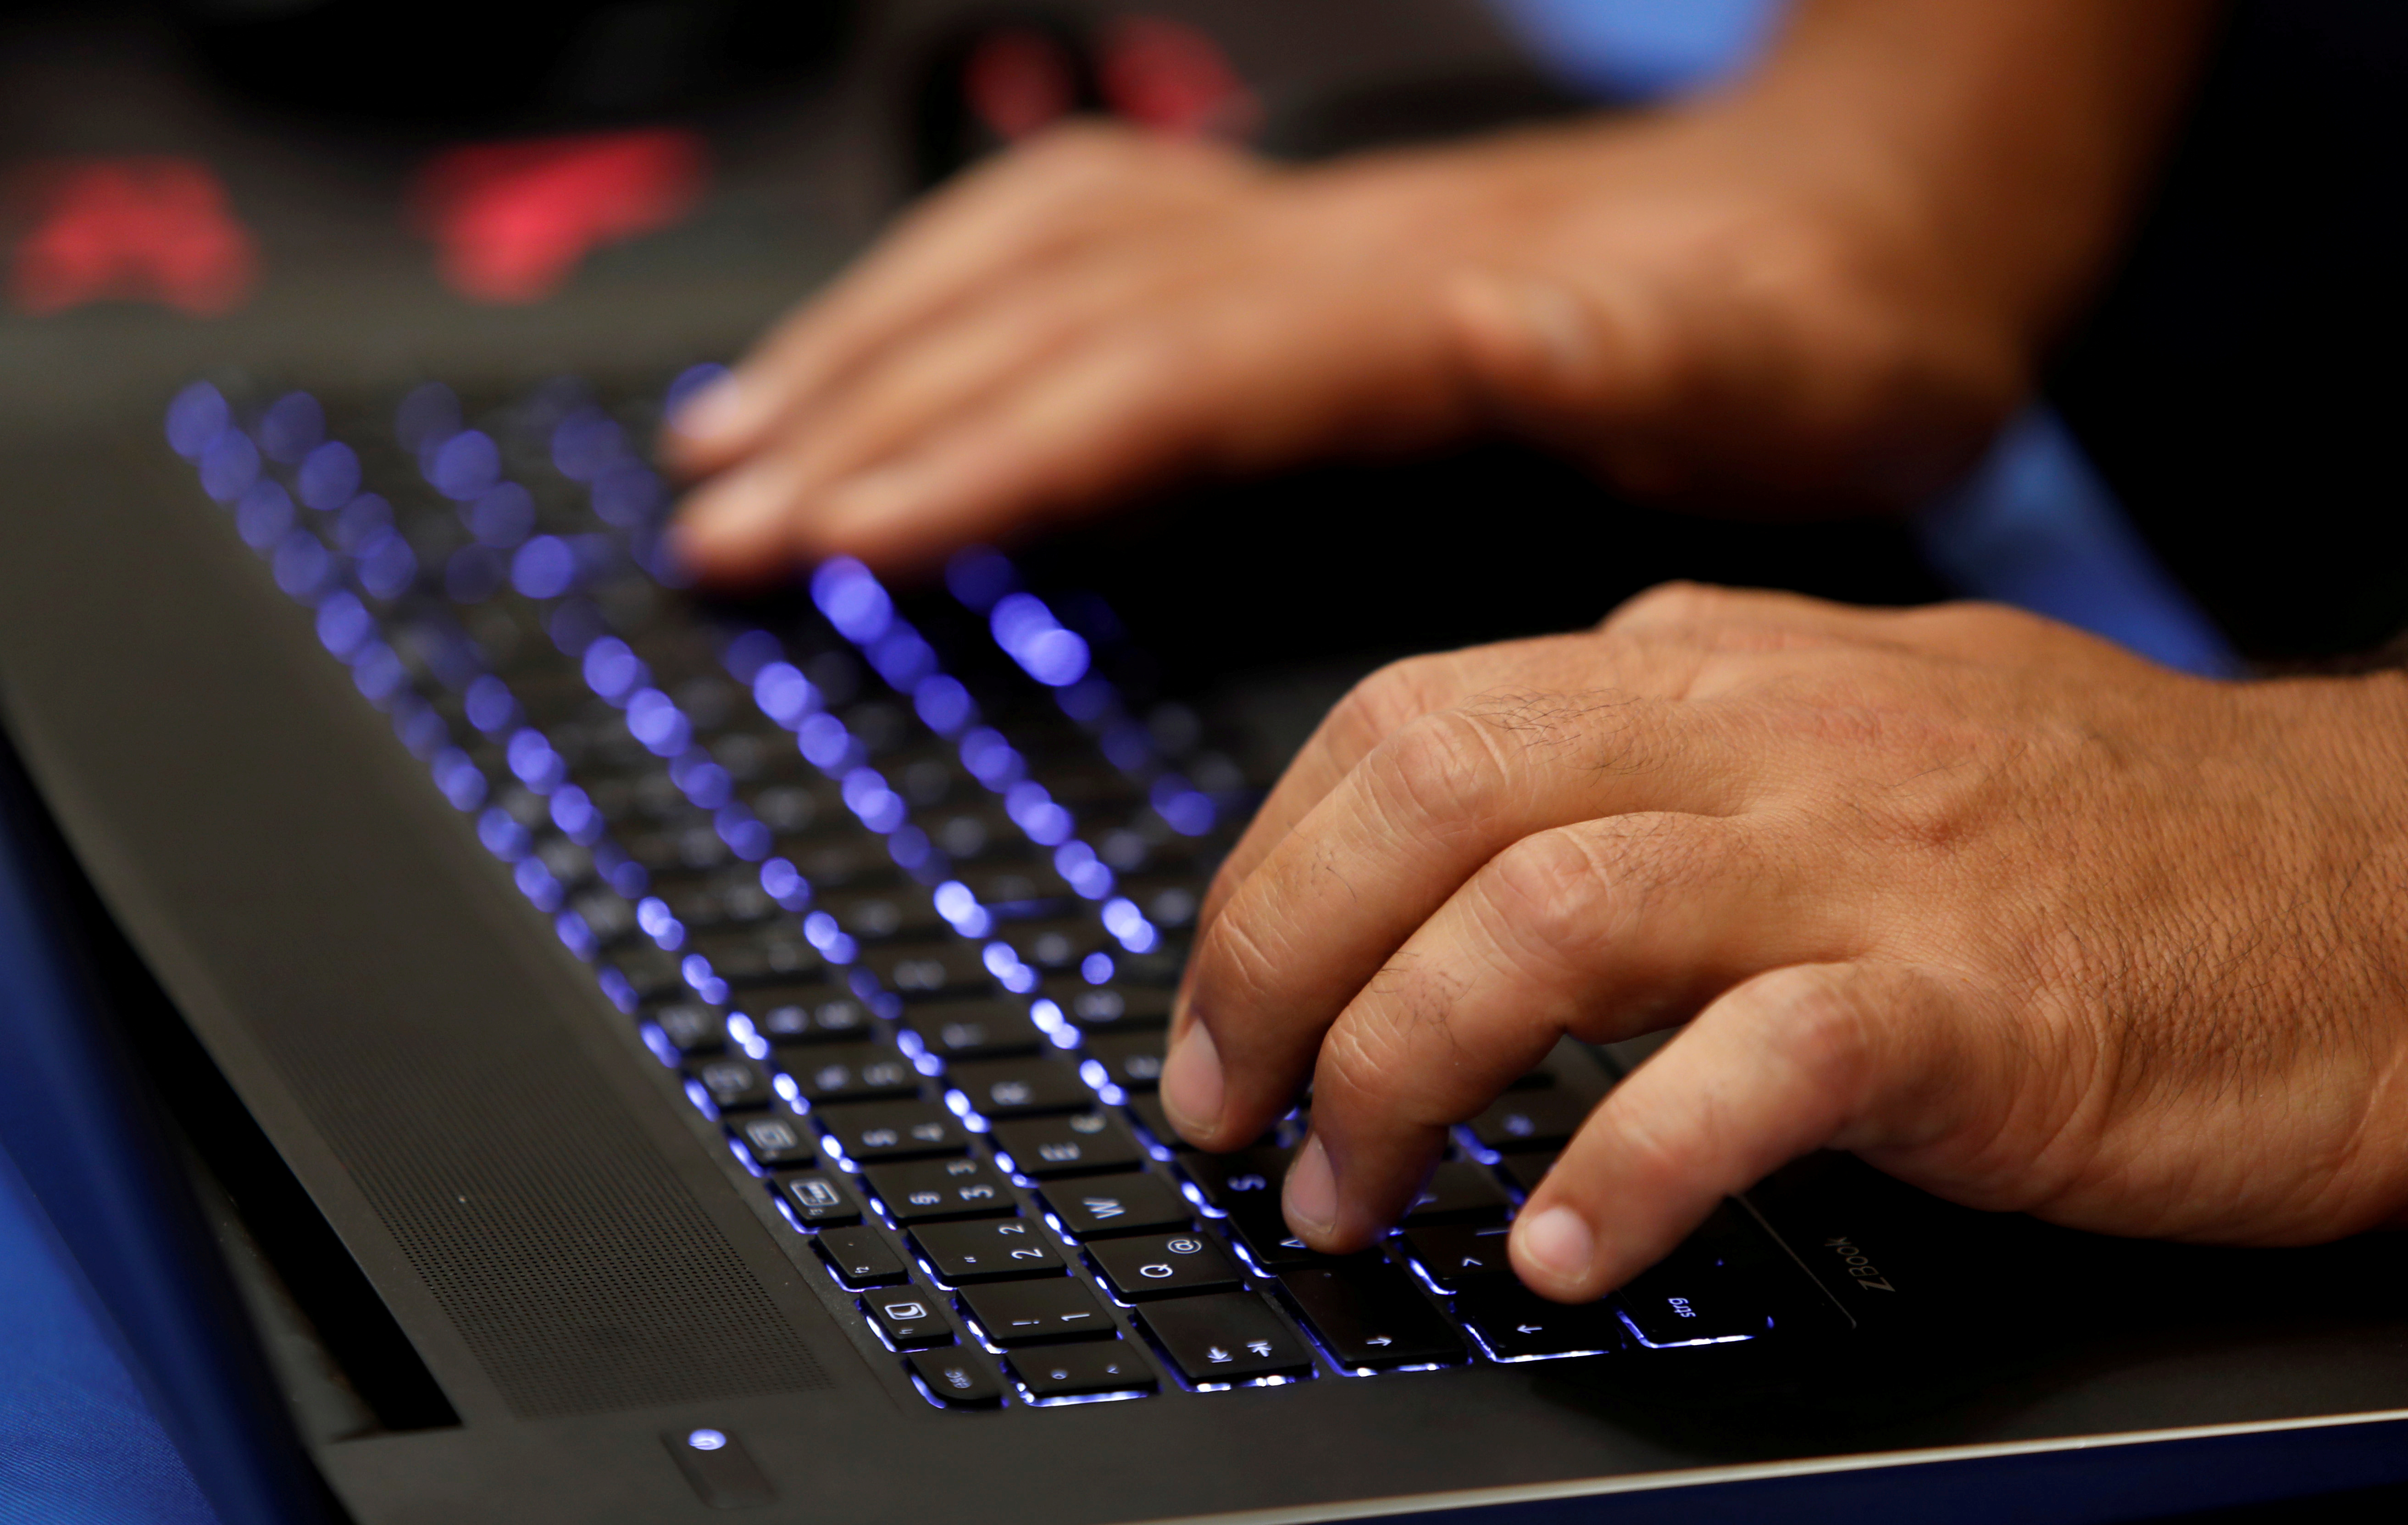 A man types into a keyboard during the Def Con hacker convention in Las Vegas